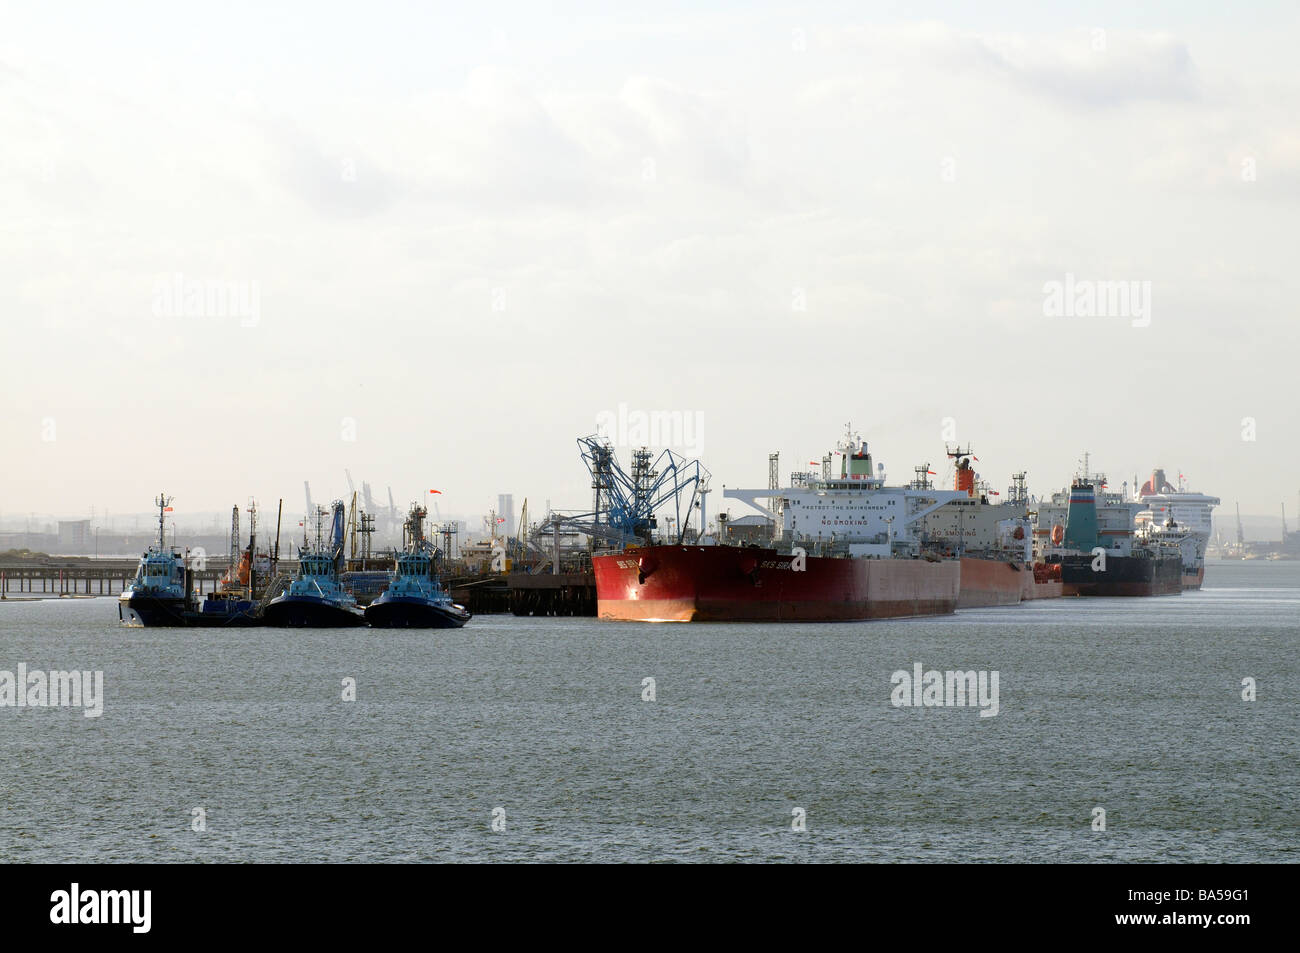 Oil and chemical tankers berthed at Fawley Refinery on Southampton Water Stock Photo